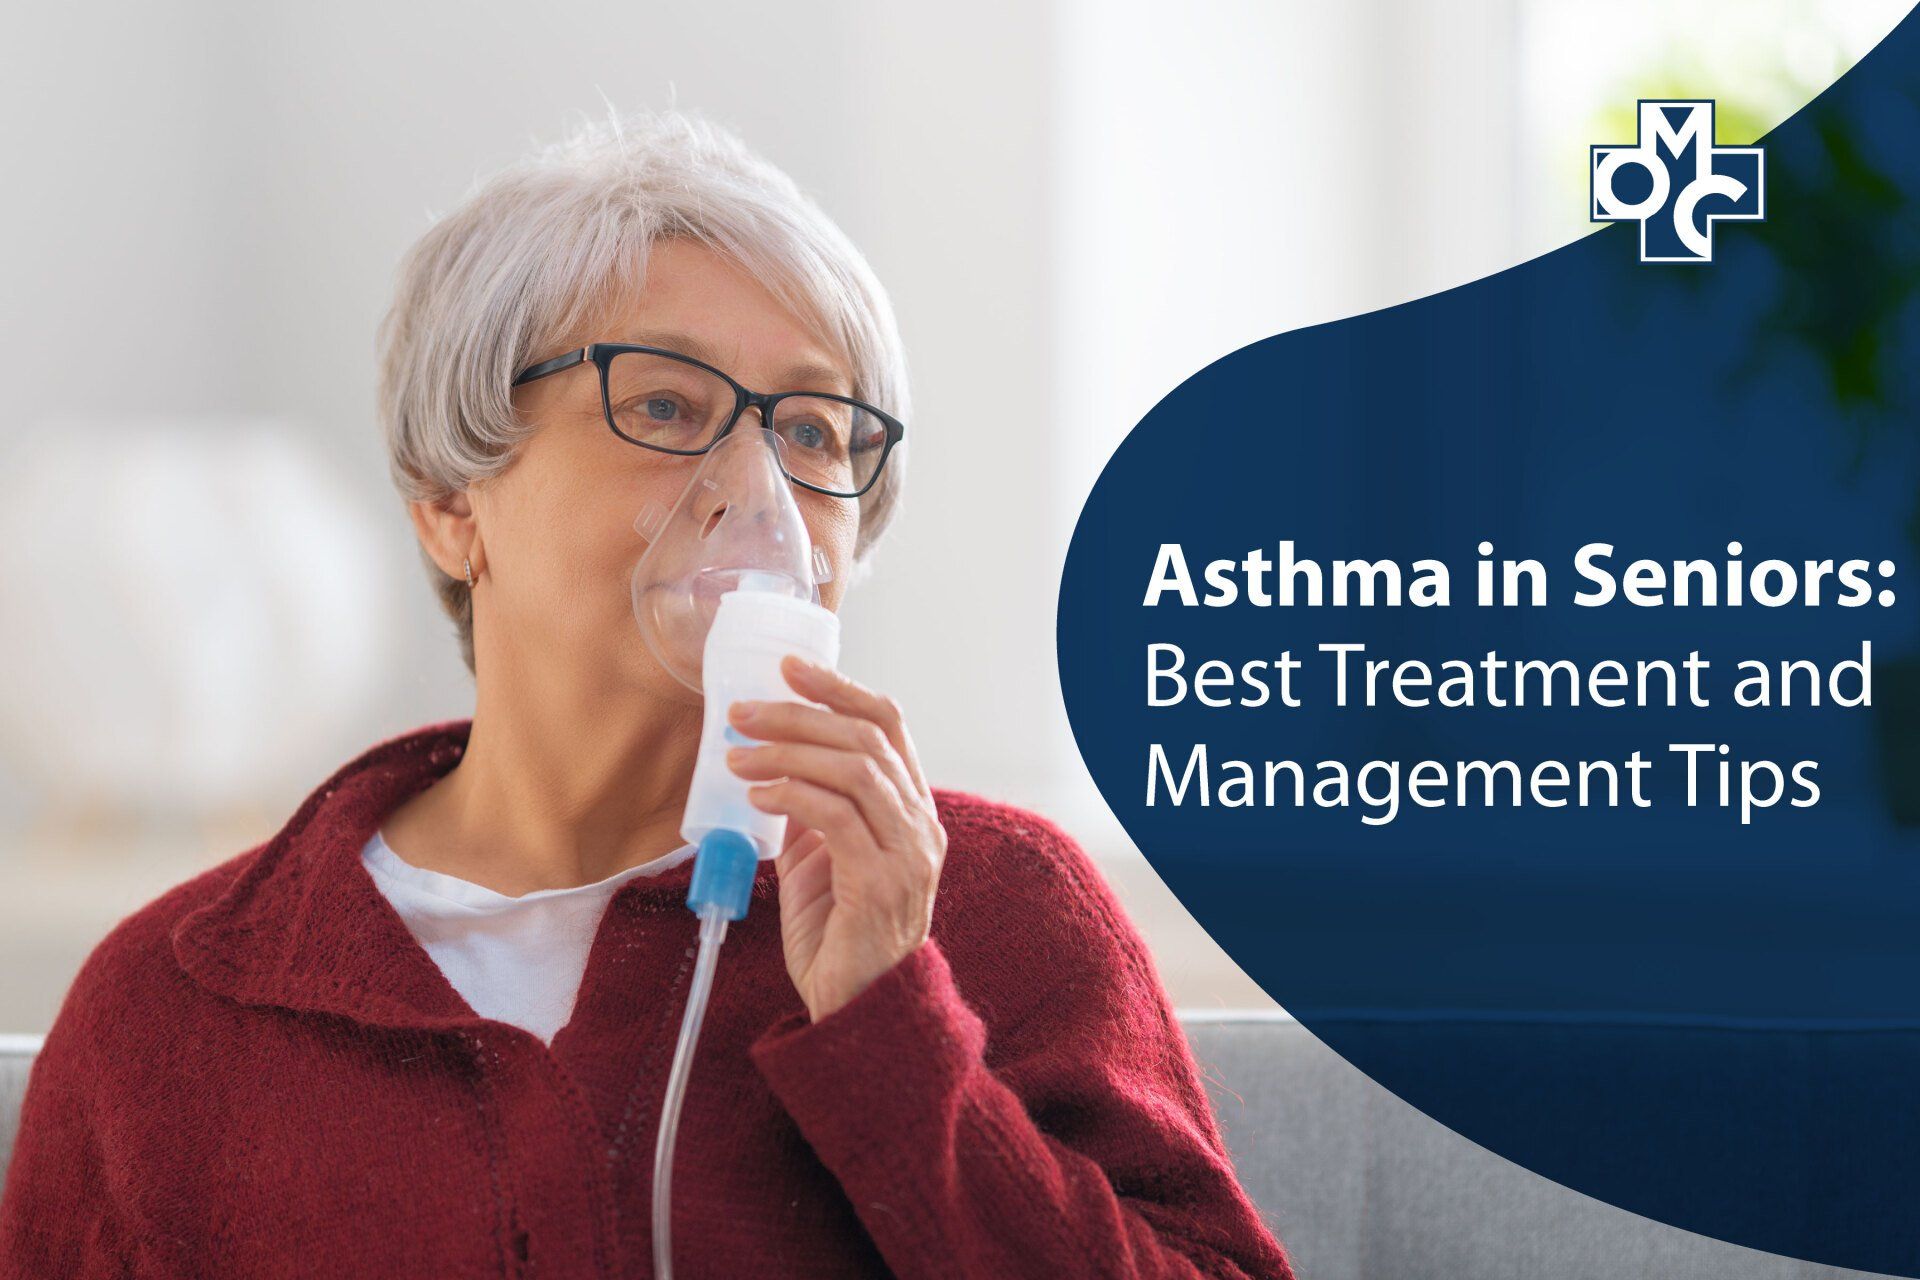 Asthma in Seniors: Best Treatment and Management Tips